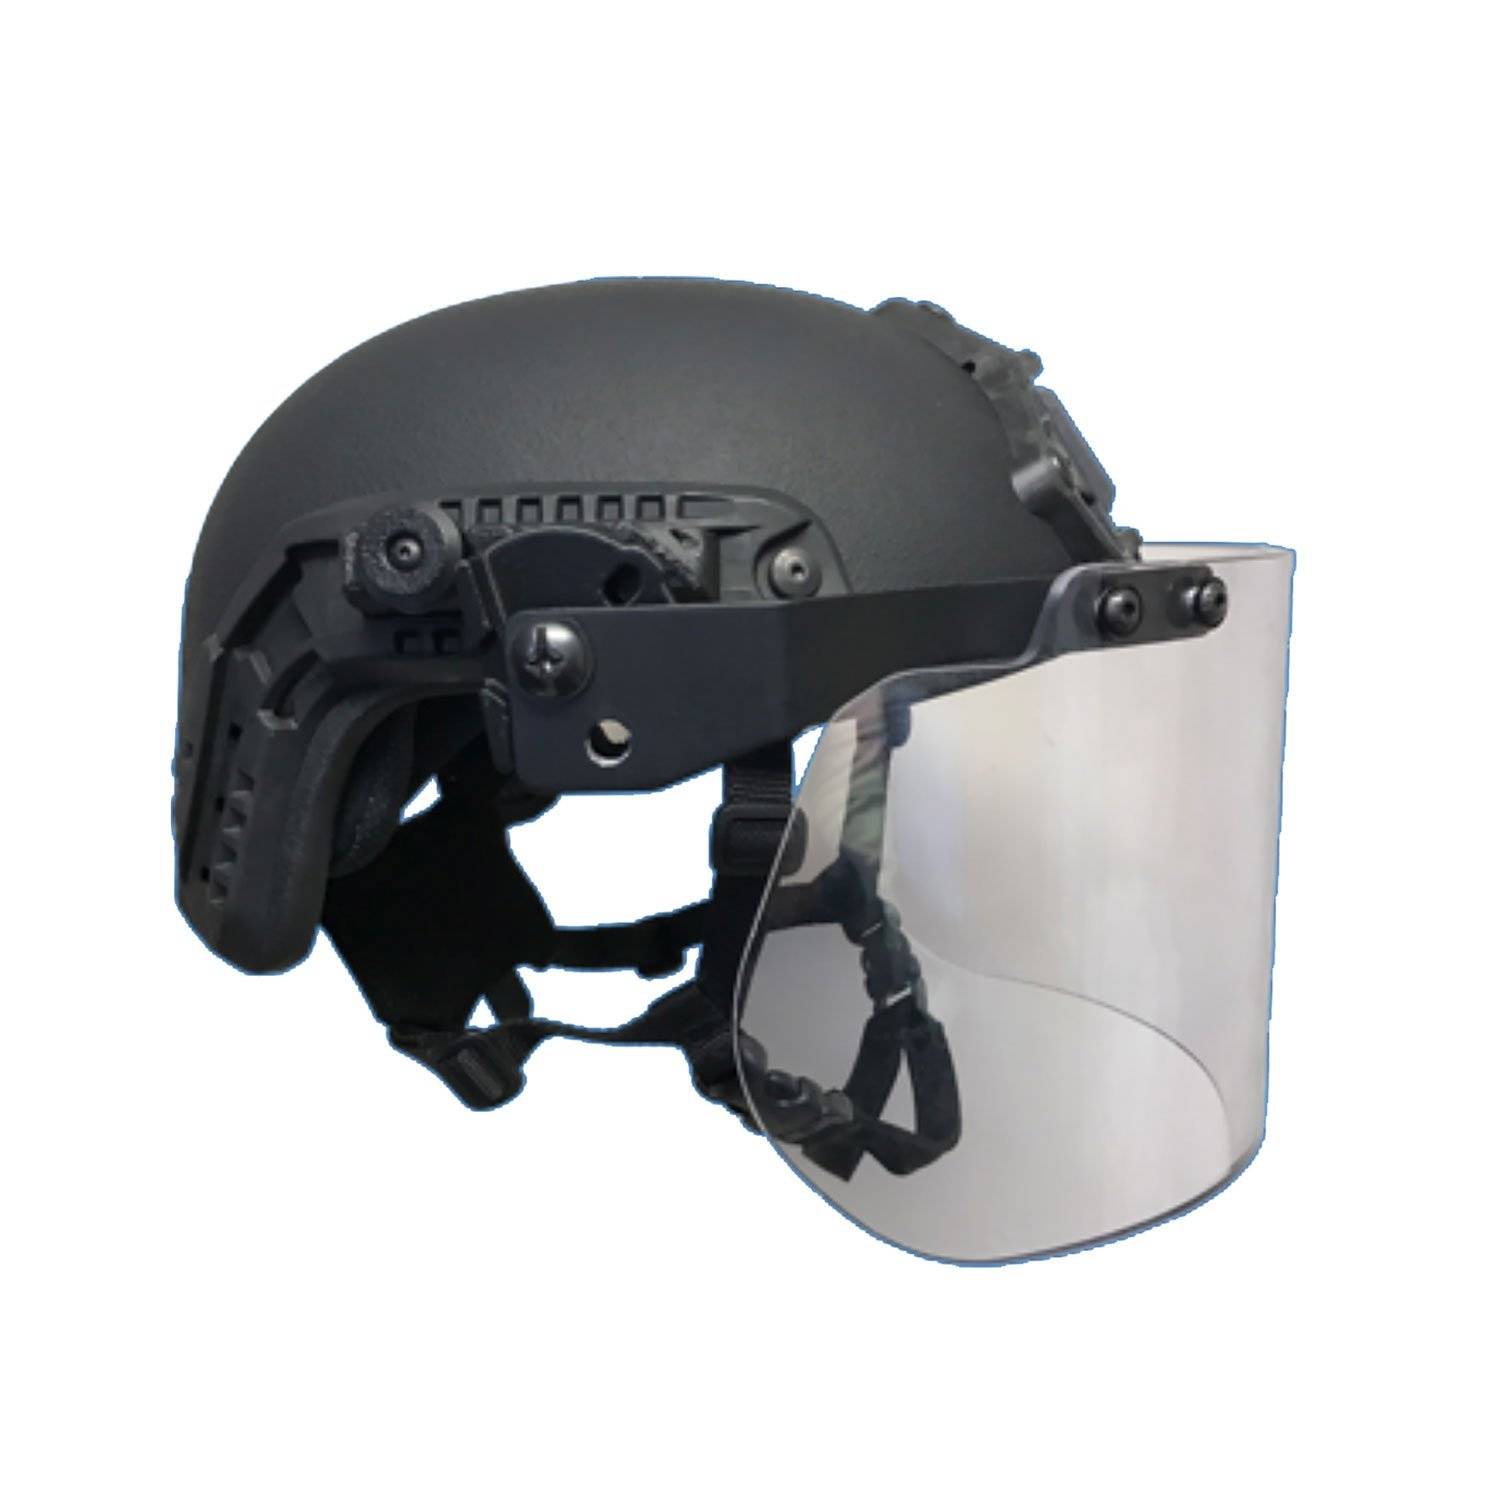 United Shield Riot Face Shield with Rail Adapter